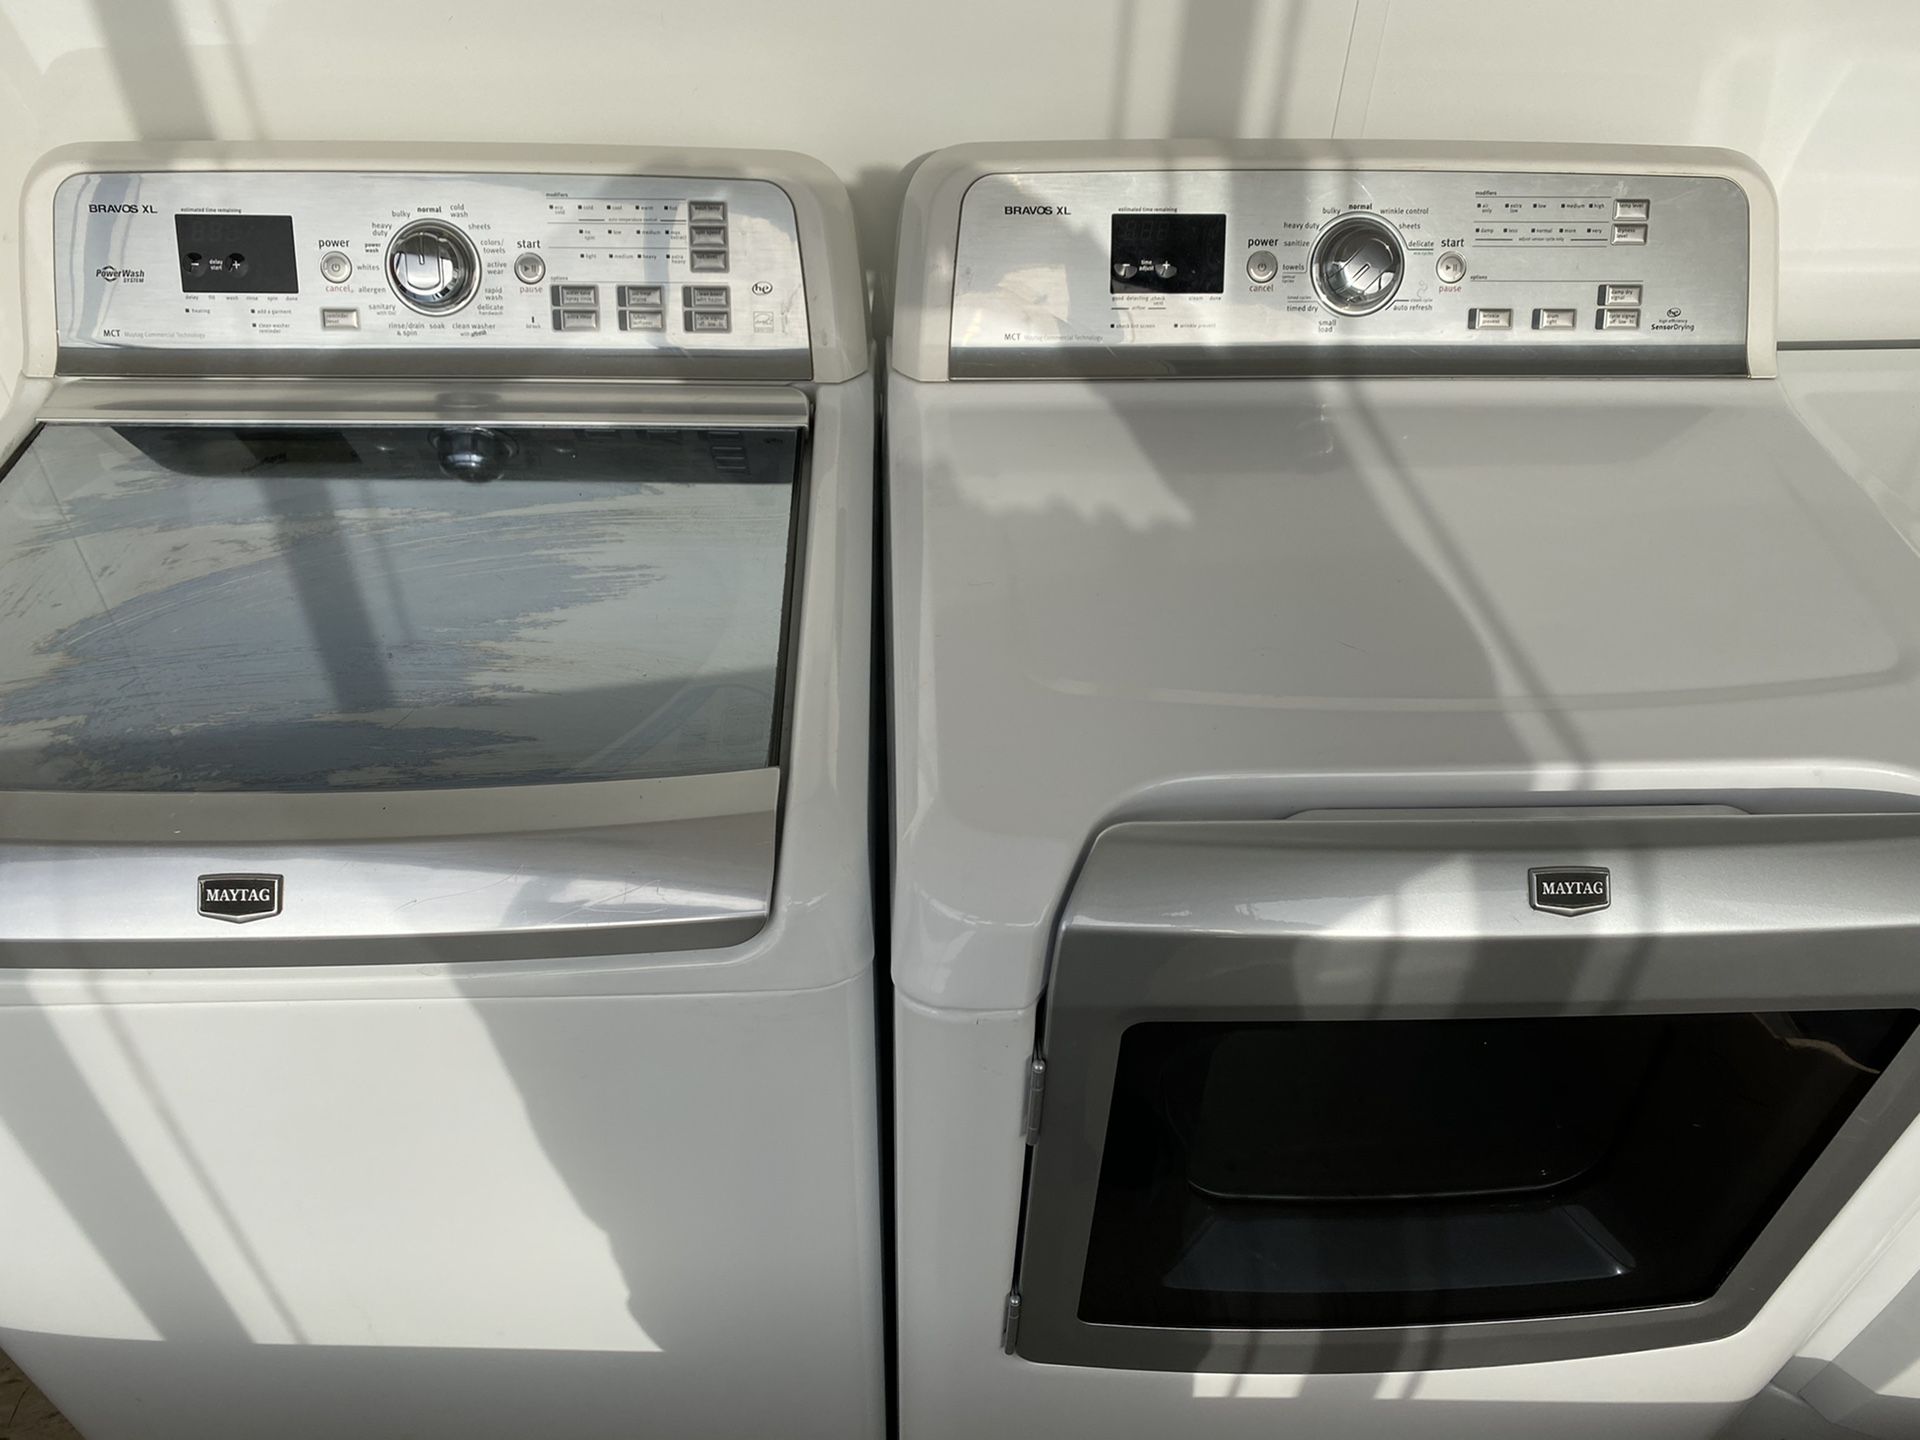 Maytag bravos XL super capacity washer and gas dryer set